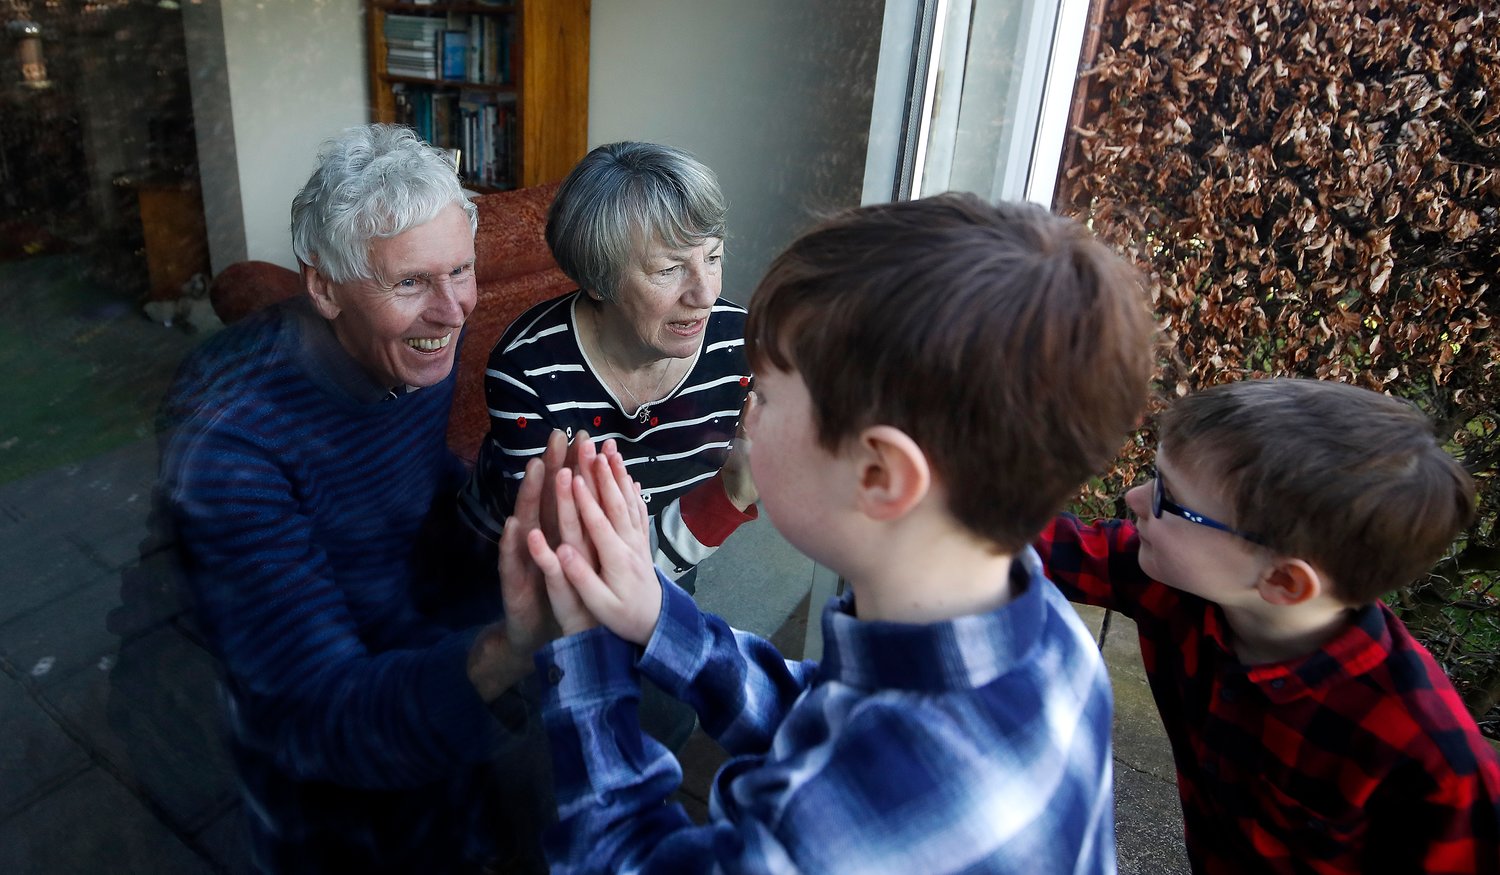 Ben and Isaac talk to their grandparents, Sue and Alan, through a window as they self-isolate at their home in Cheshire, England, March 22, 2020. (CNS photo/Martin Rickett, PA Images via Reuters) See POPE-ANGELUS-GRANDPARENTS July 27, 2020.